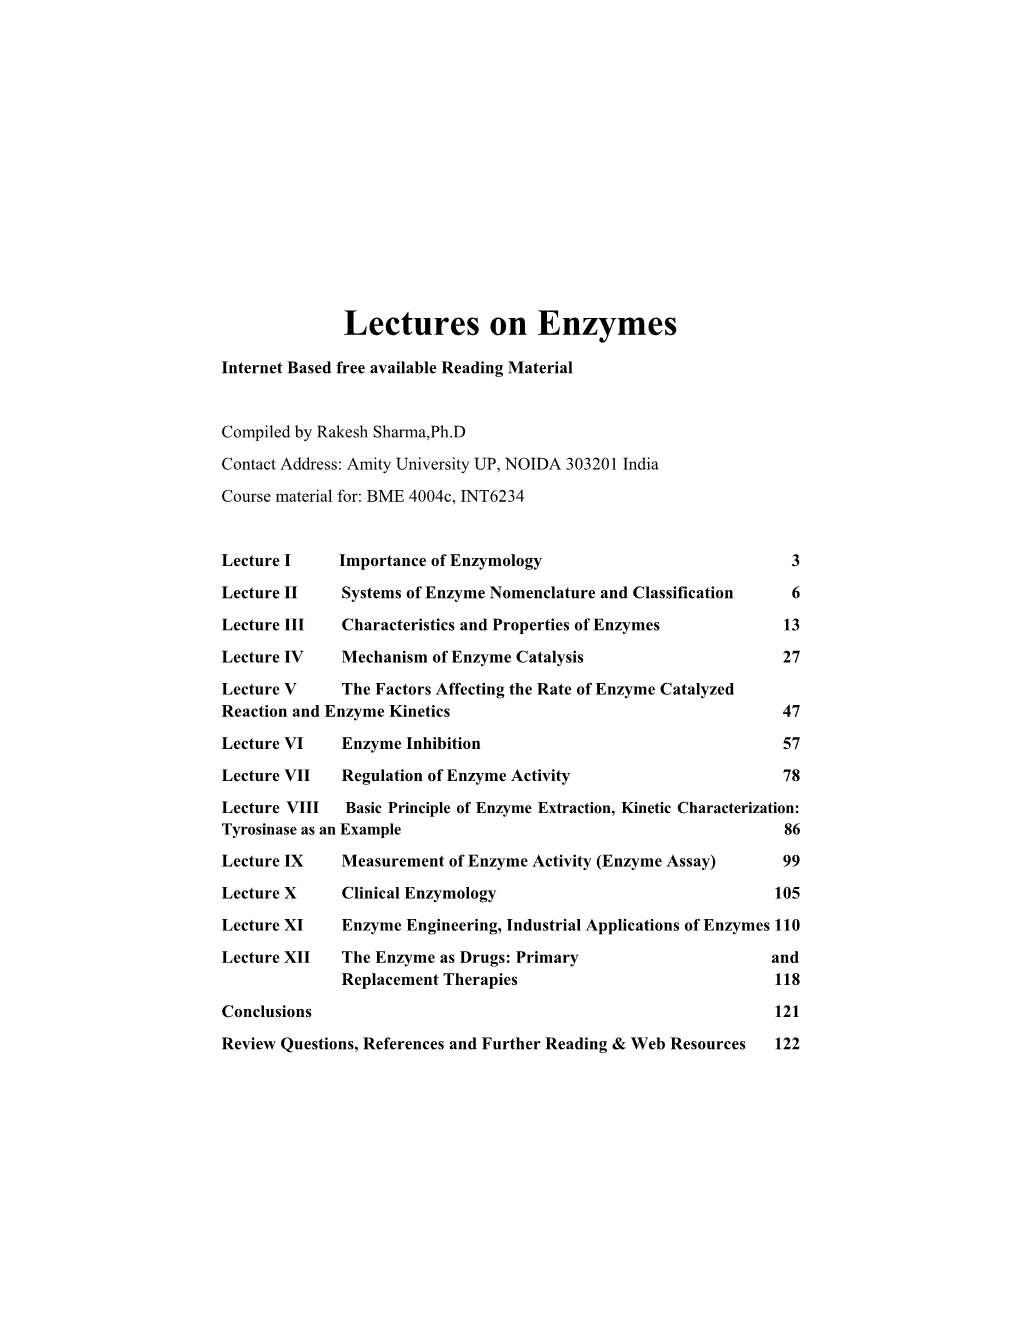 Lectures on Enzymes.Pdf